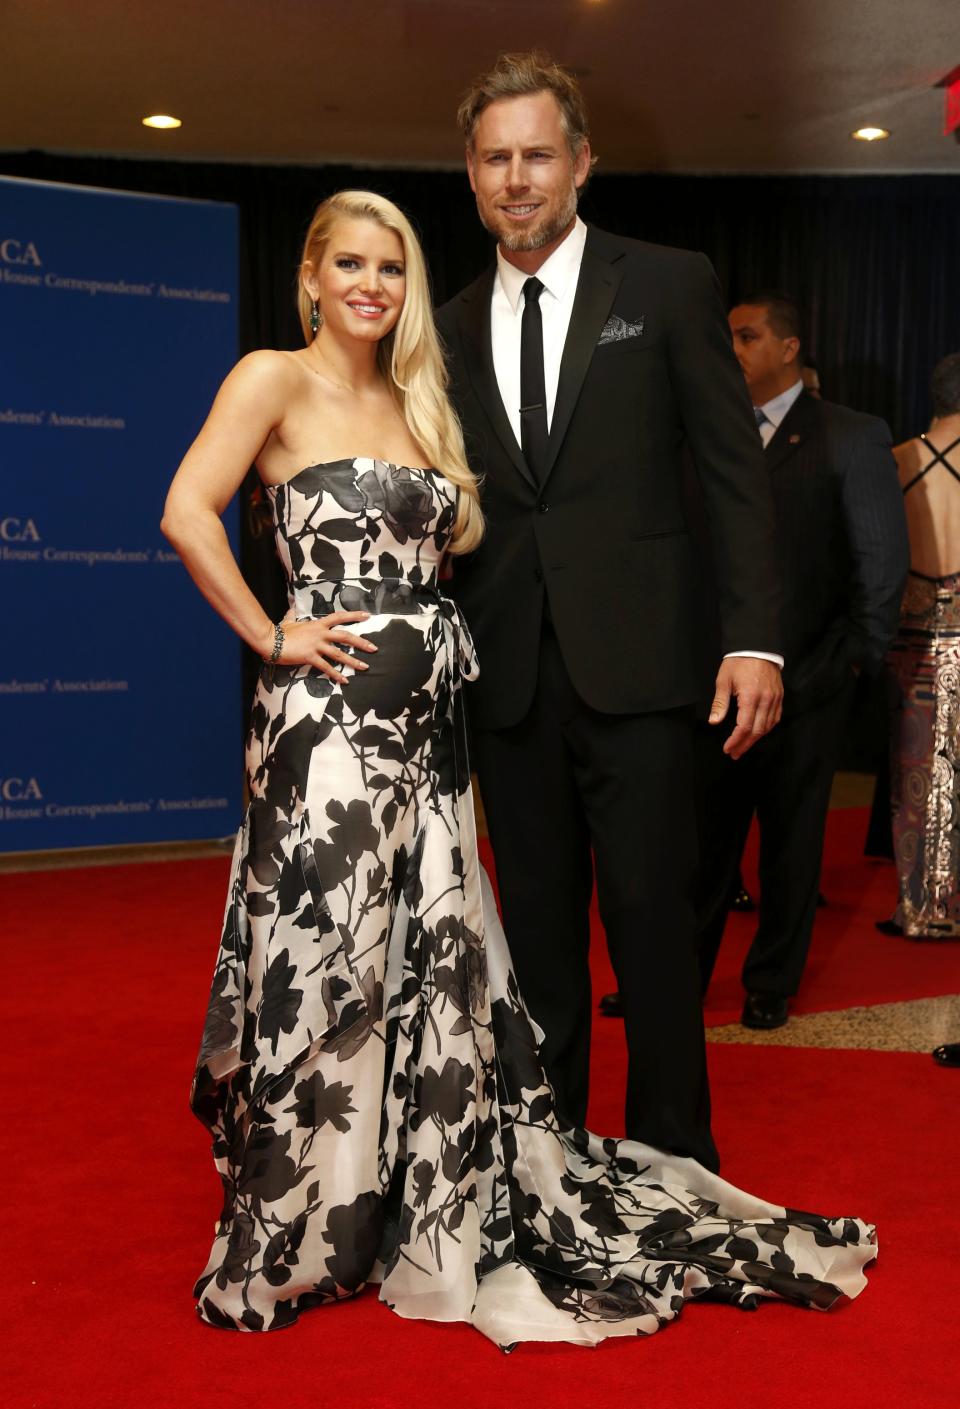 Actors Jessica Simpson and Eric Johnson arrive on the red carpet at the annual White House Correspondents' Association Dinner in Washington, May 3, 2014. (REUTERS/Jonathan Ernst)